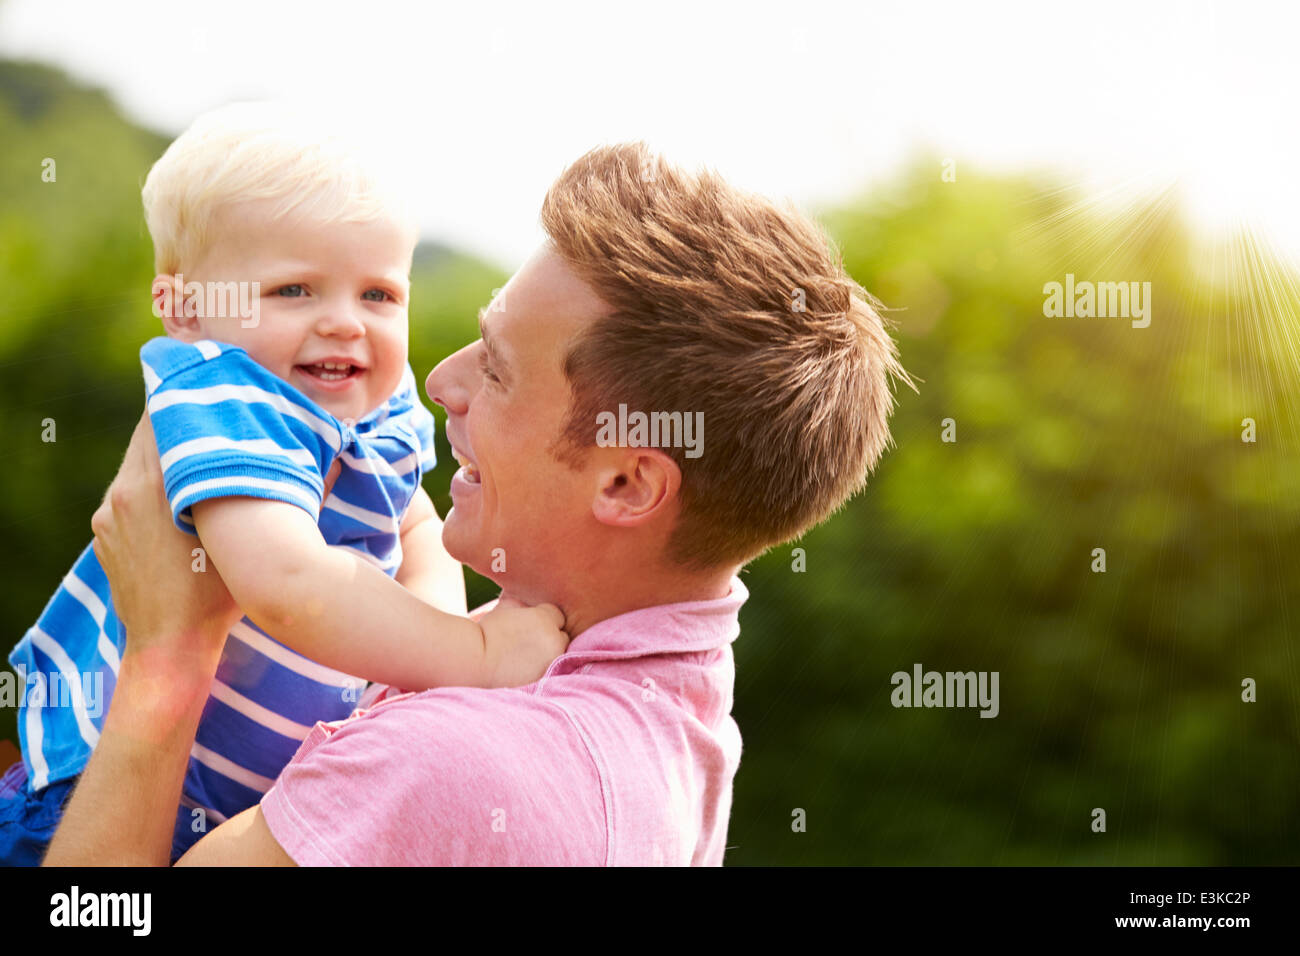 Father Hugging Young Son In Garden Stock Photo